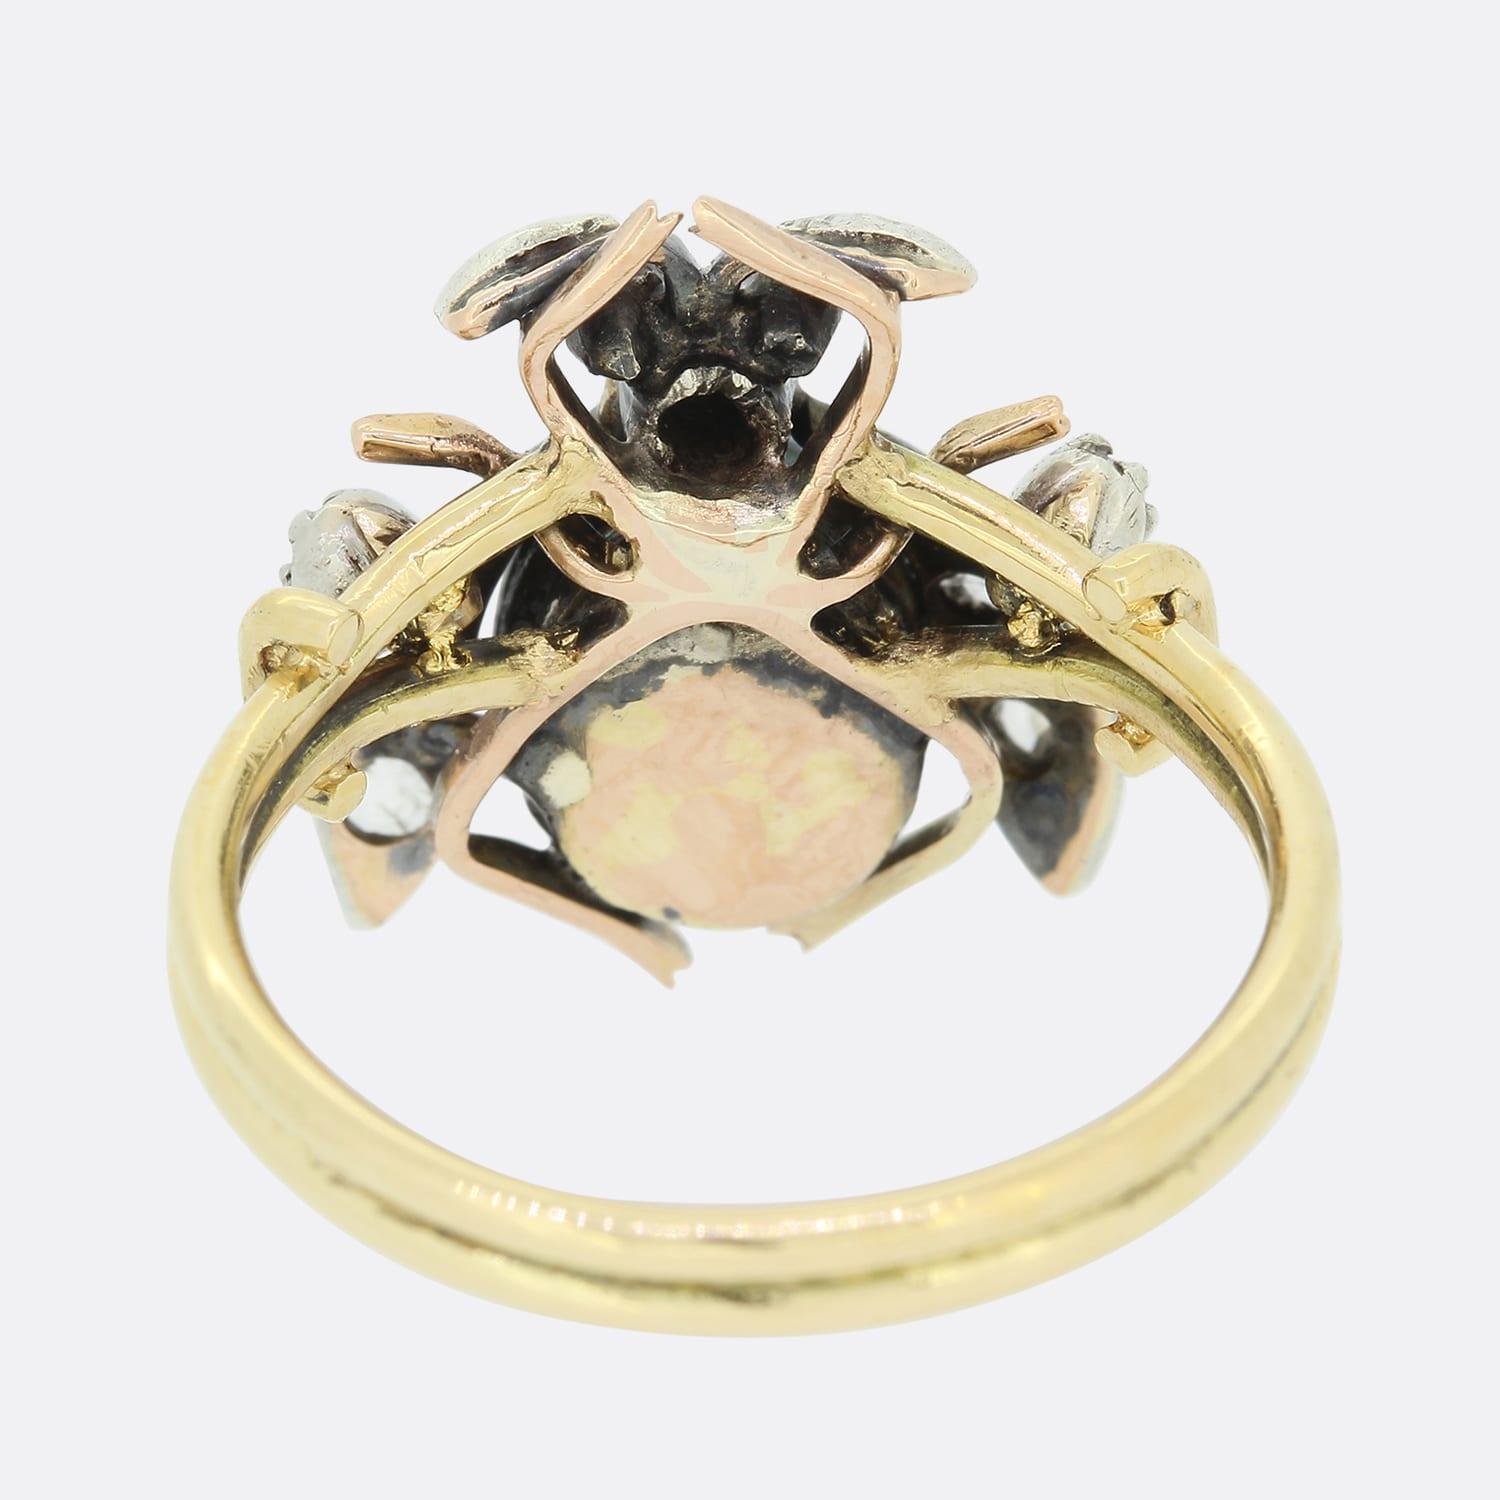 This is an 18ct yellow gold diamond, pearl and ruby fly ring. The ring consists of natural black pearl which makes up part of the body while the wings have been set with rose cut diamonds and the eyes set with rubies. The head of the ring originally